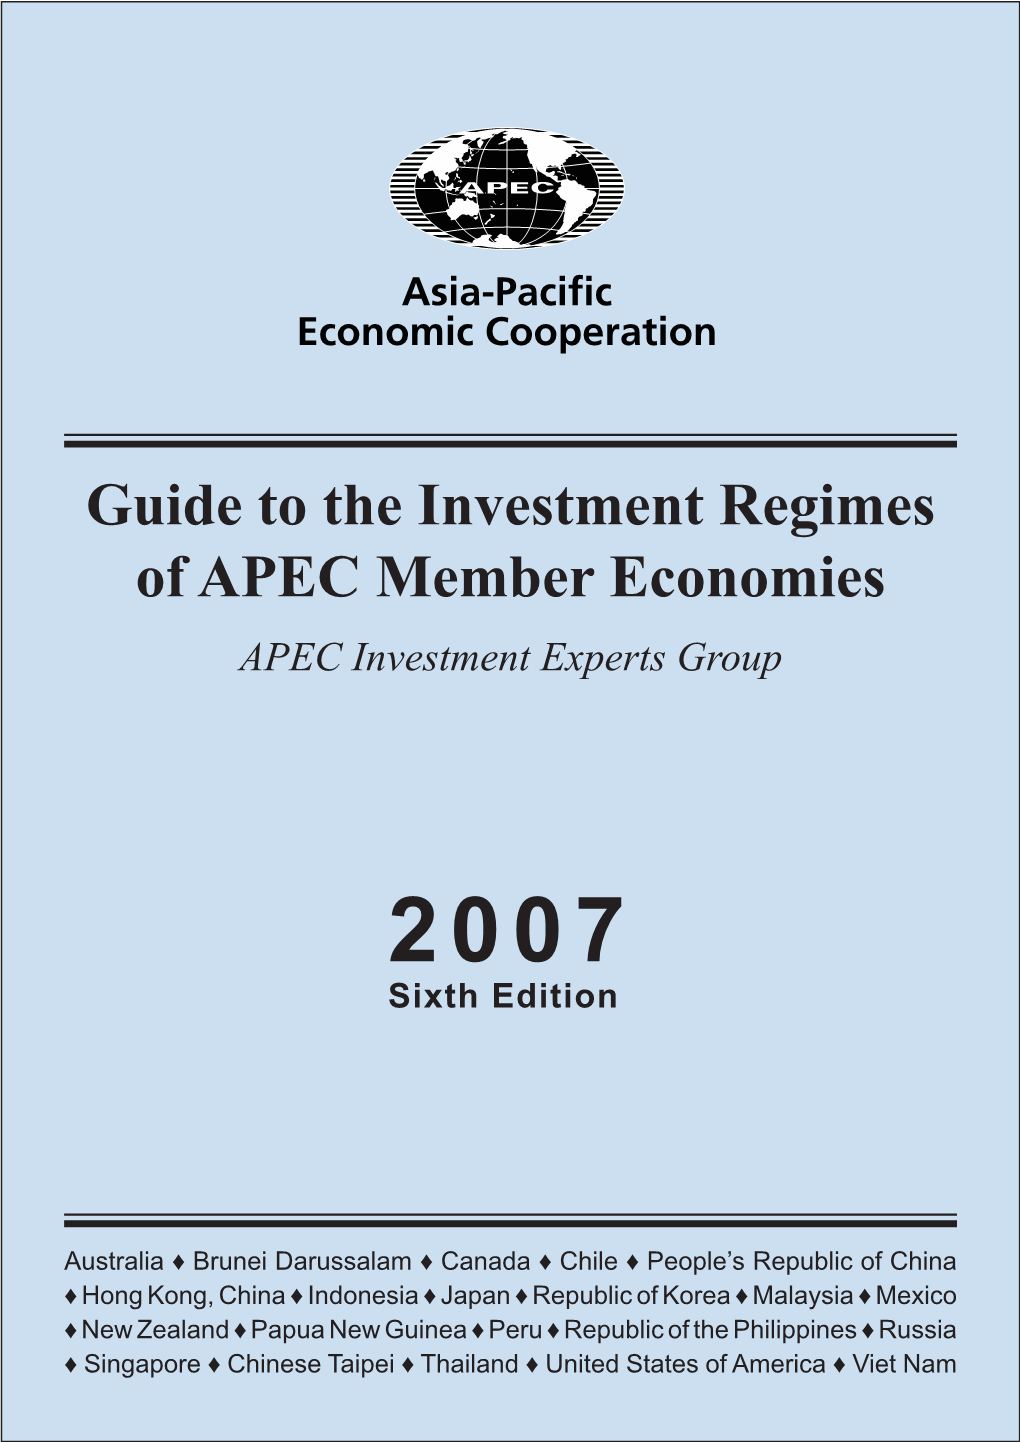 Guide to the Investment Regimes of APEC Member Economies 2007